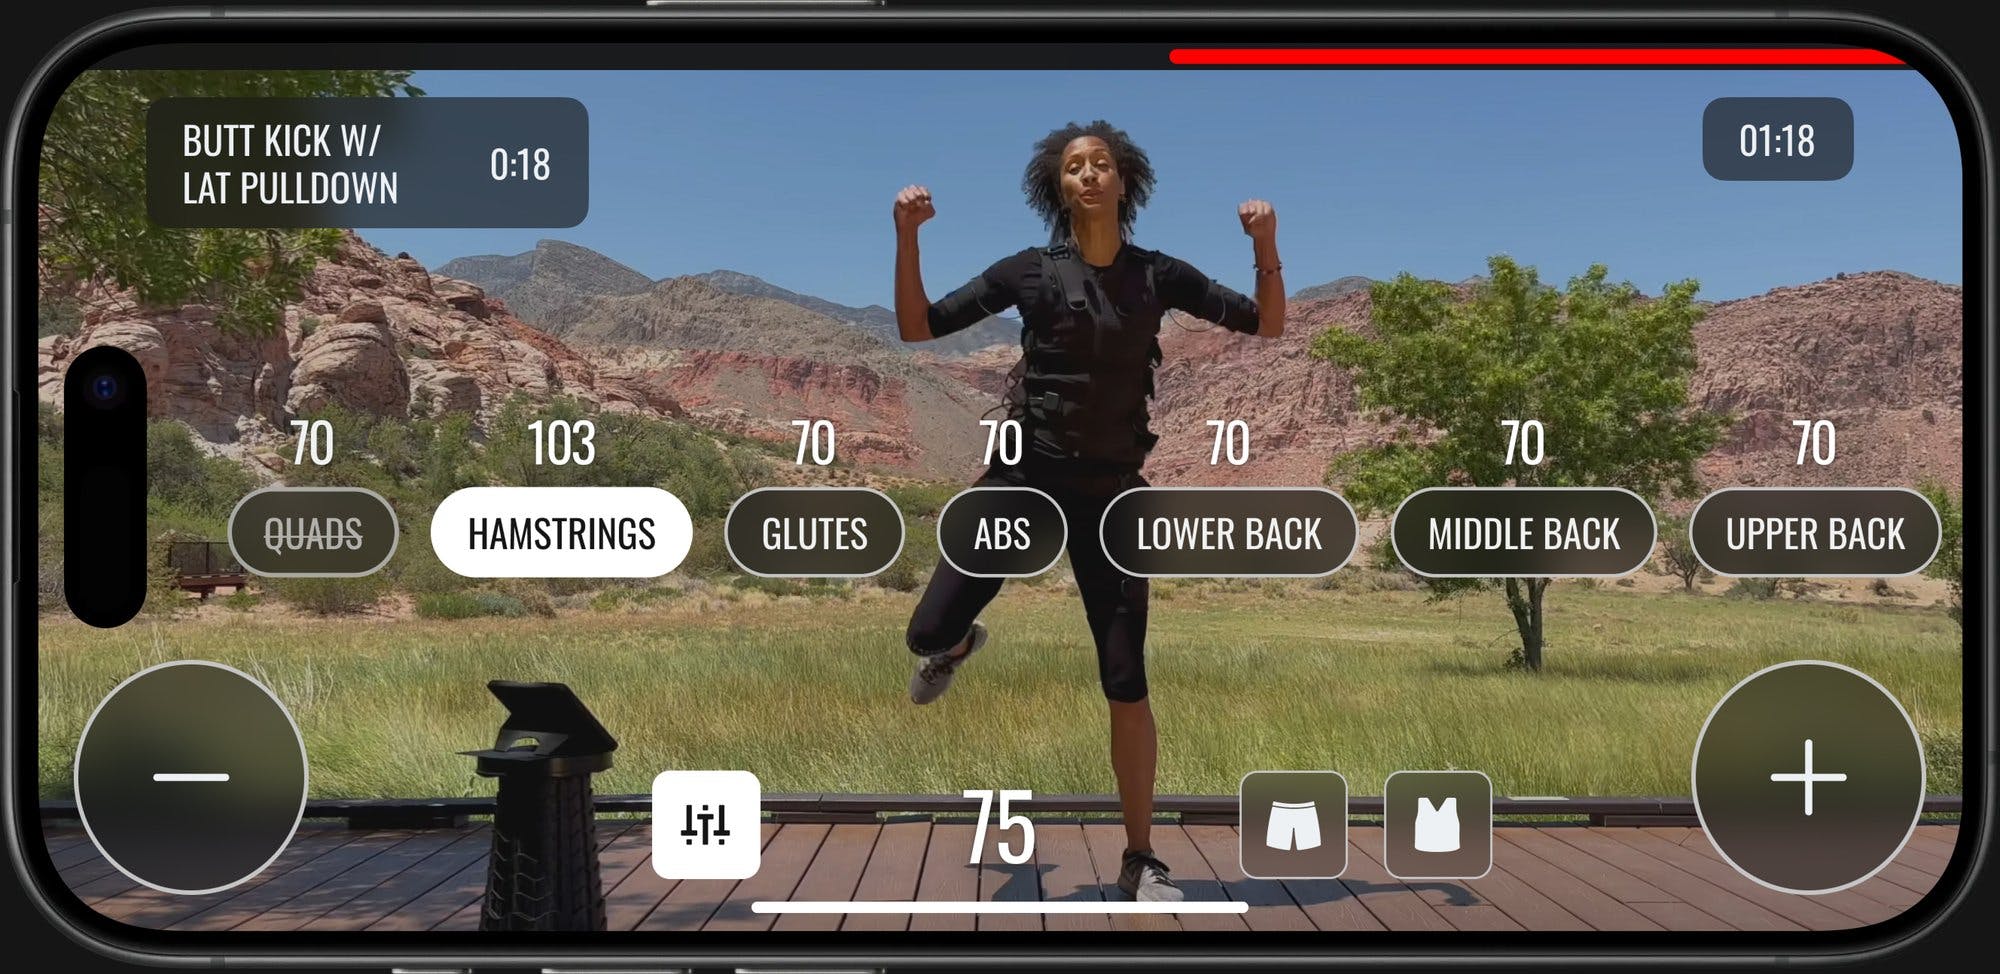 The Katalyst App is your ultimate fitness hub, providing personalized workouts, tracking your achievements, and optimizing your intensity levels.